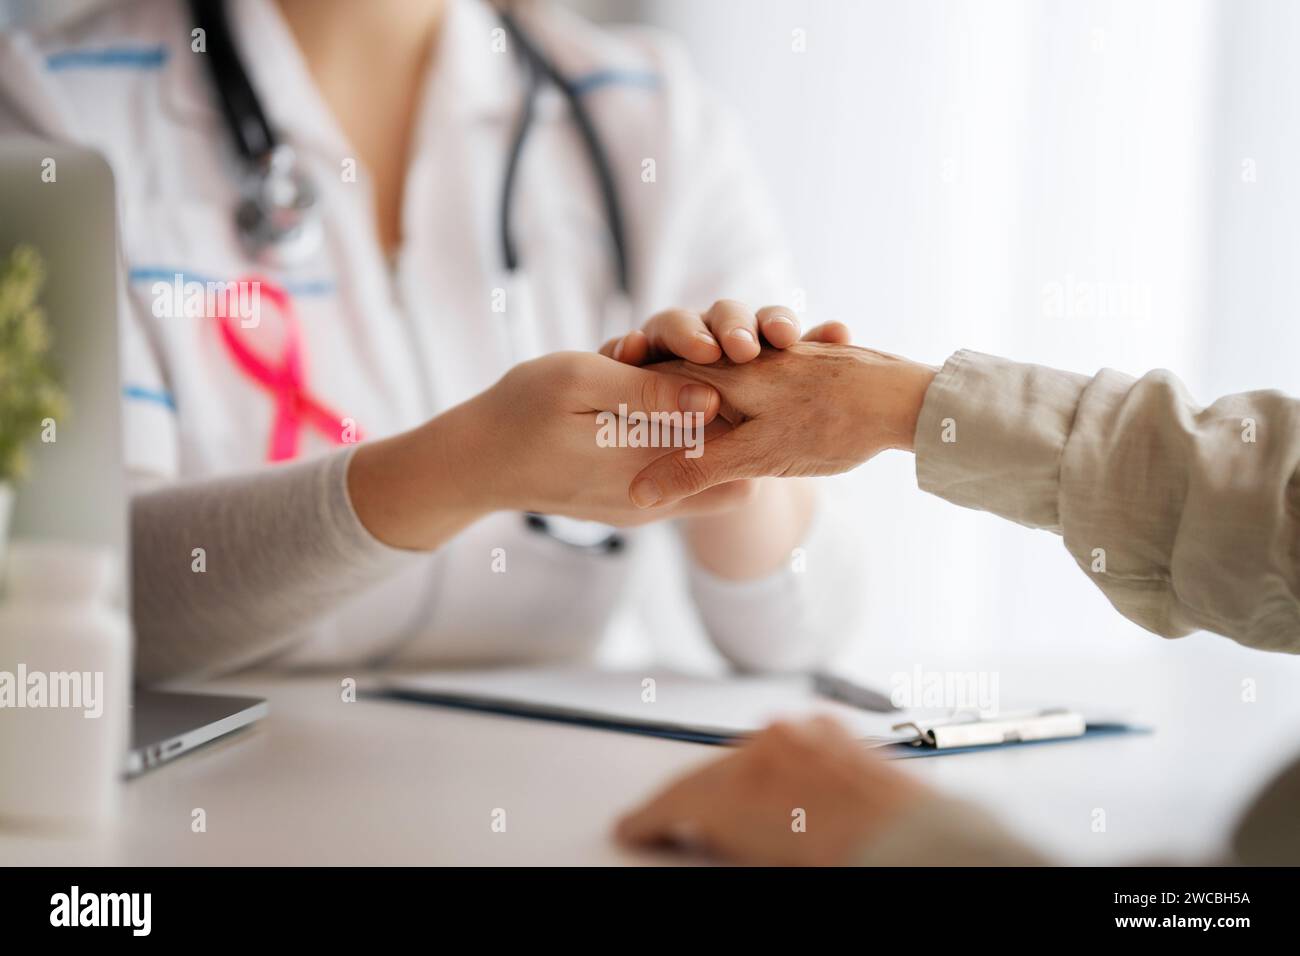 Pink ribbon for breast cancer awareness. Female patient listening to doctor in medical office. Support people living with tumor illness. Stock Photo